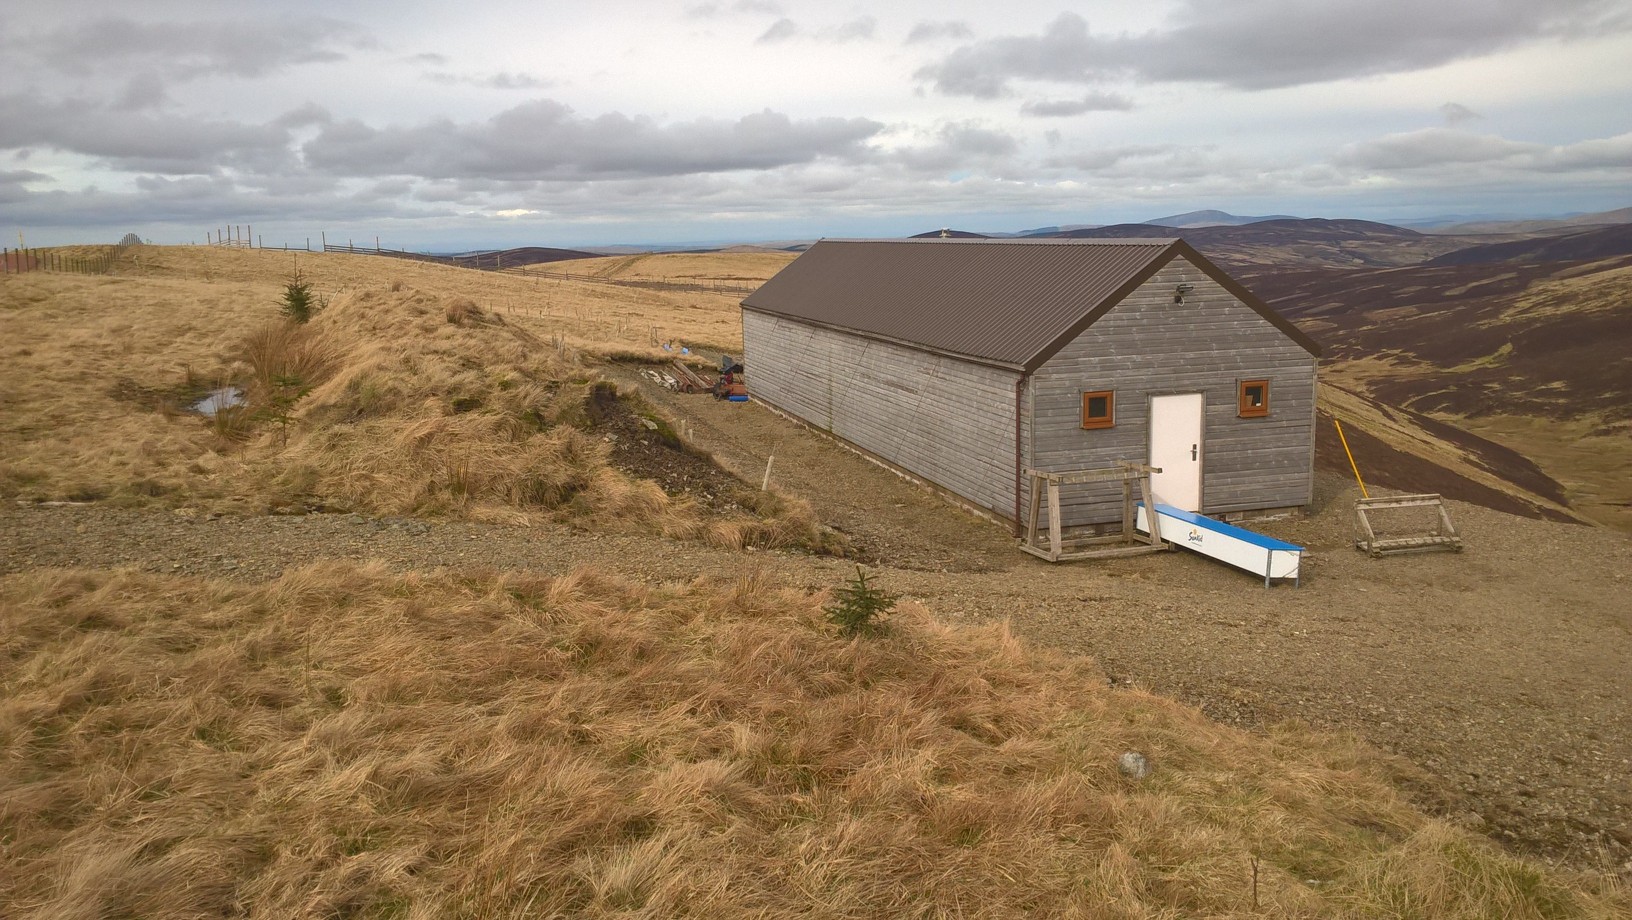 A Picture of the shed in place at the ski club